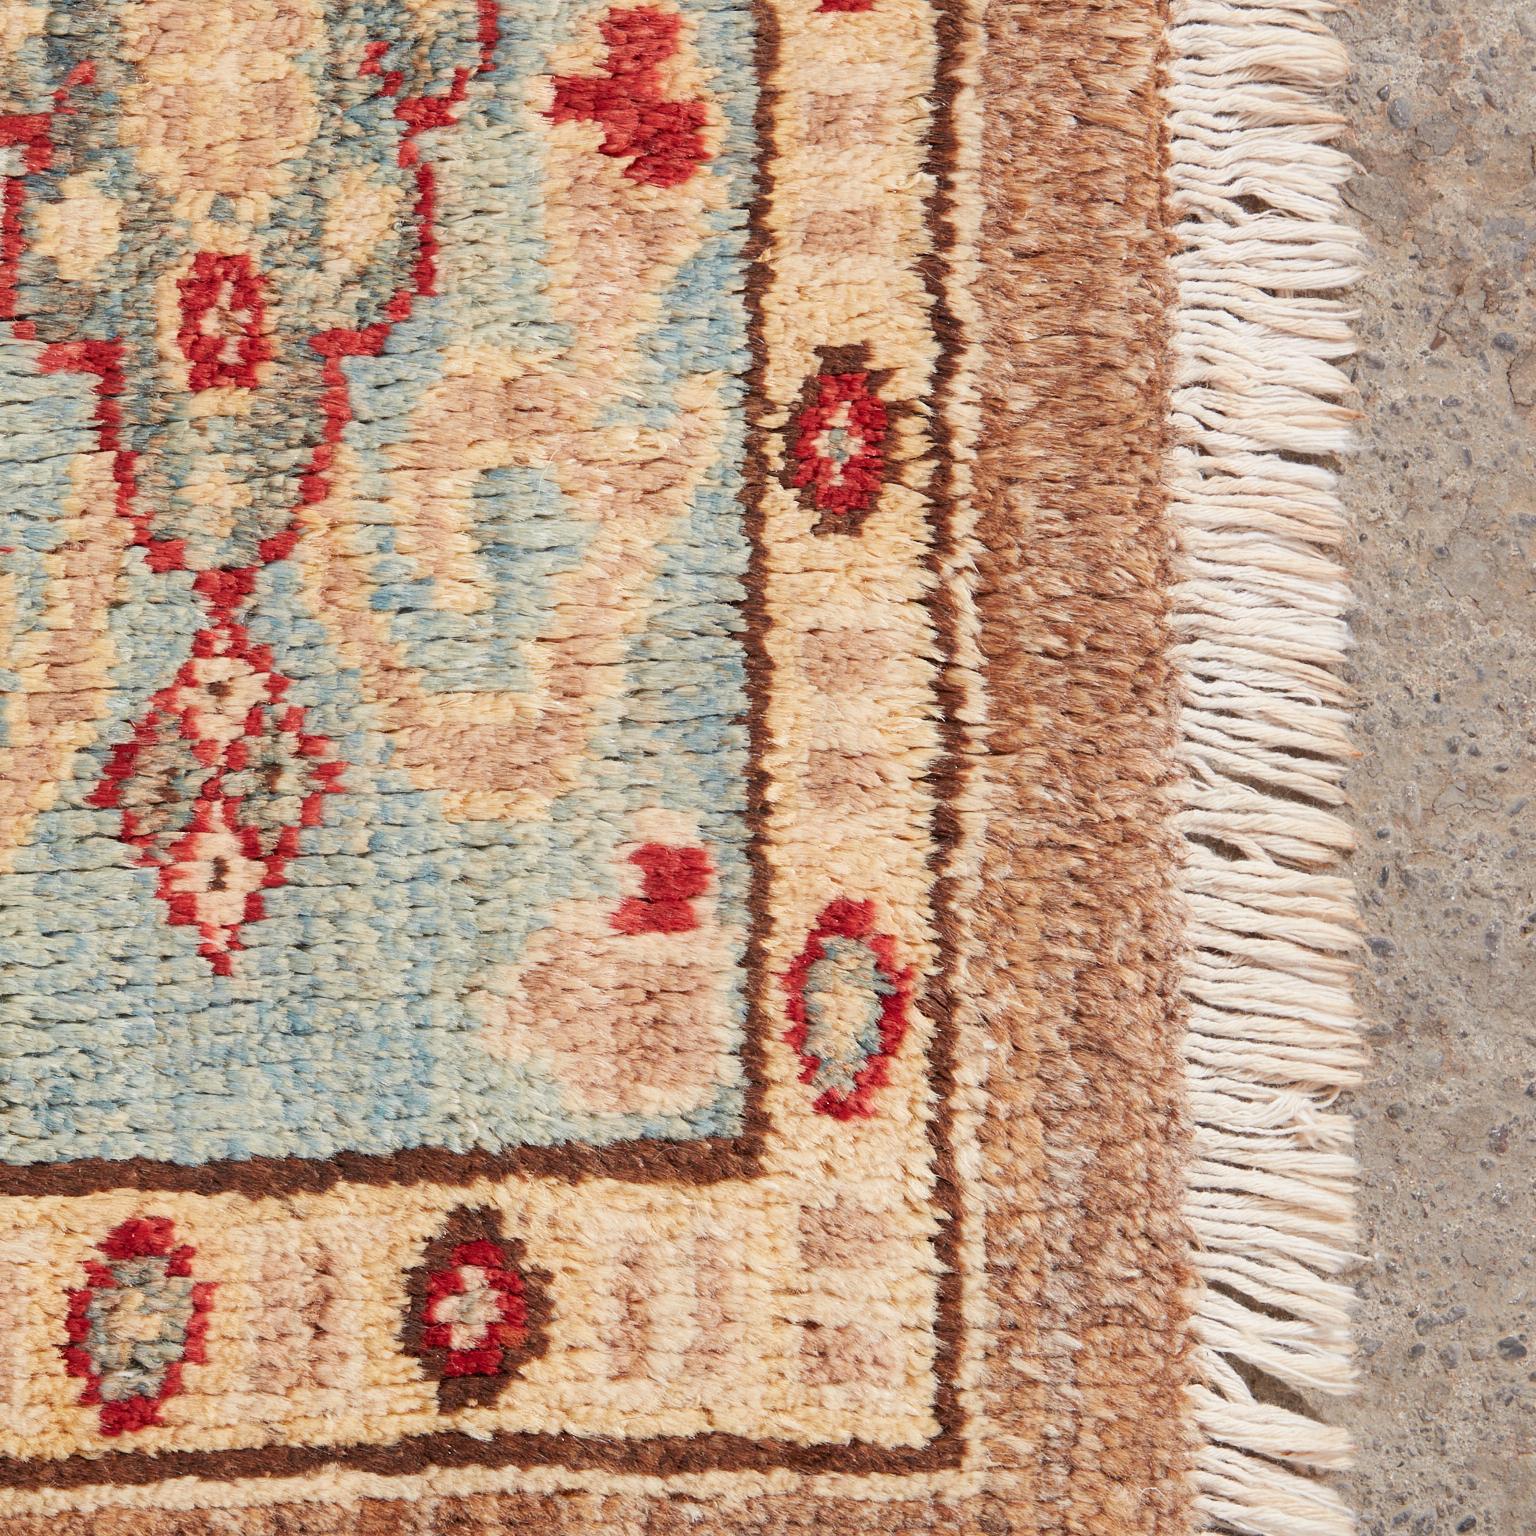 Contemporary Persian Mahal Style Rug Jewel Tones For Sale